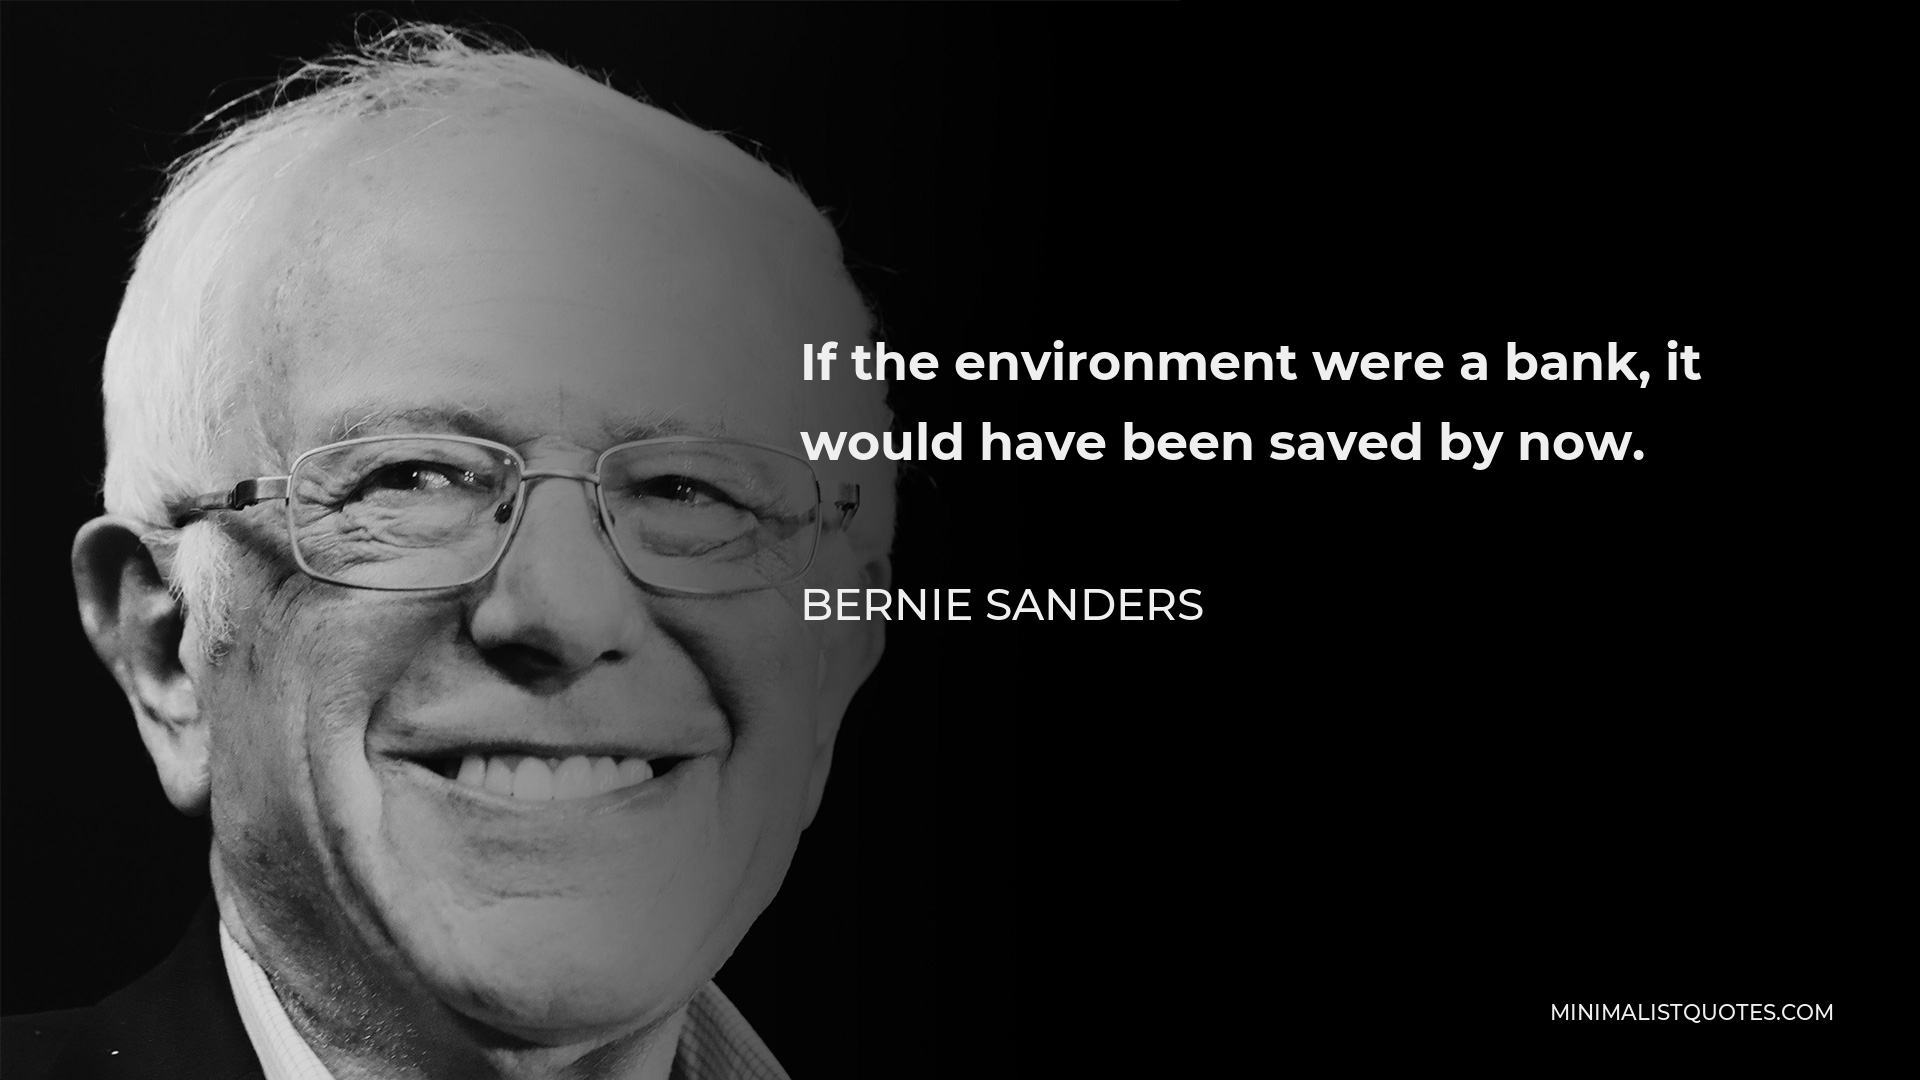 Bernie Sanders Quote - If the environment were a bank, it would have been saved by now.